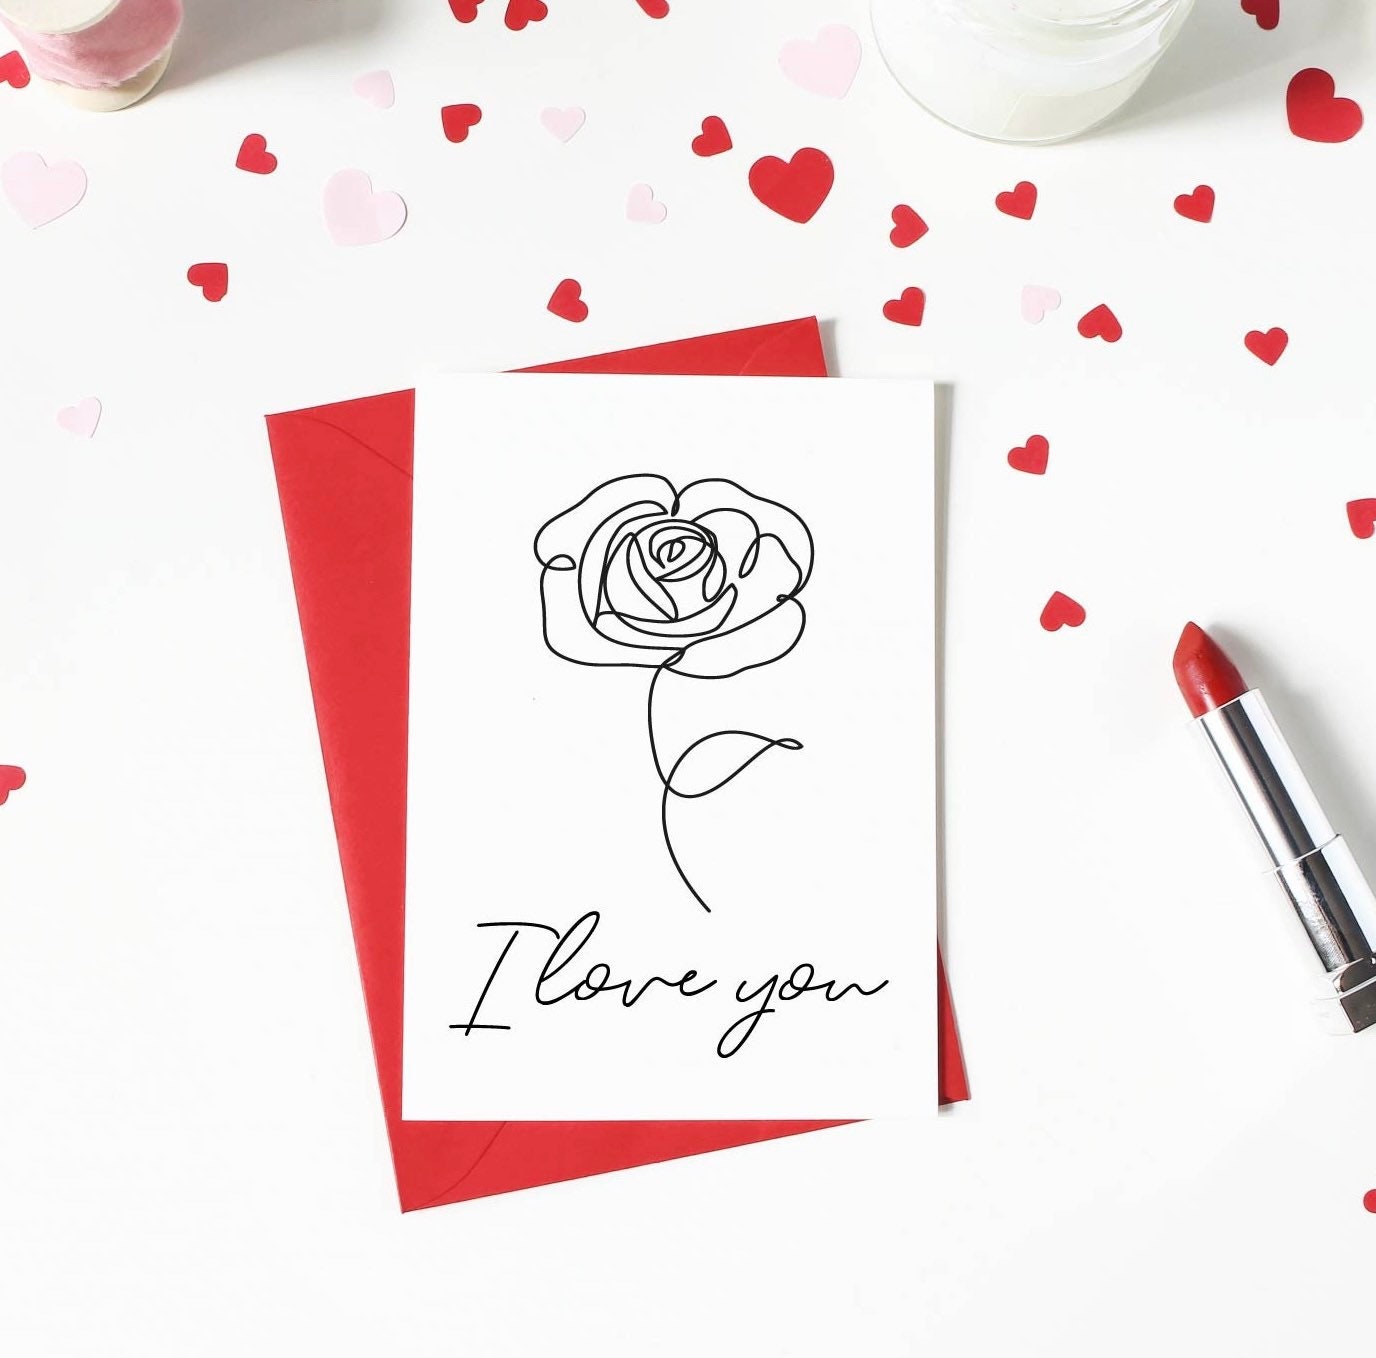 I love you Valentine’s Day card, anniversary cards, romantic cards for wife girlfriend boyfriend husband fiance, love card, rose design